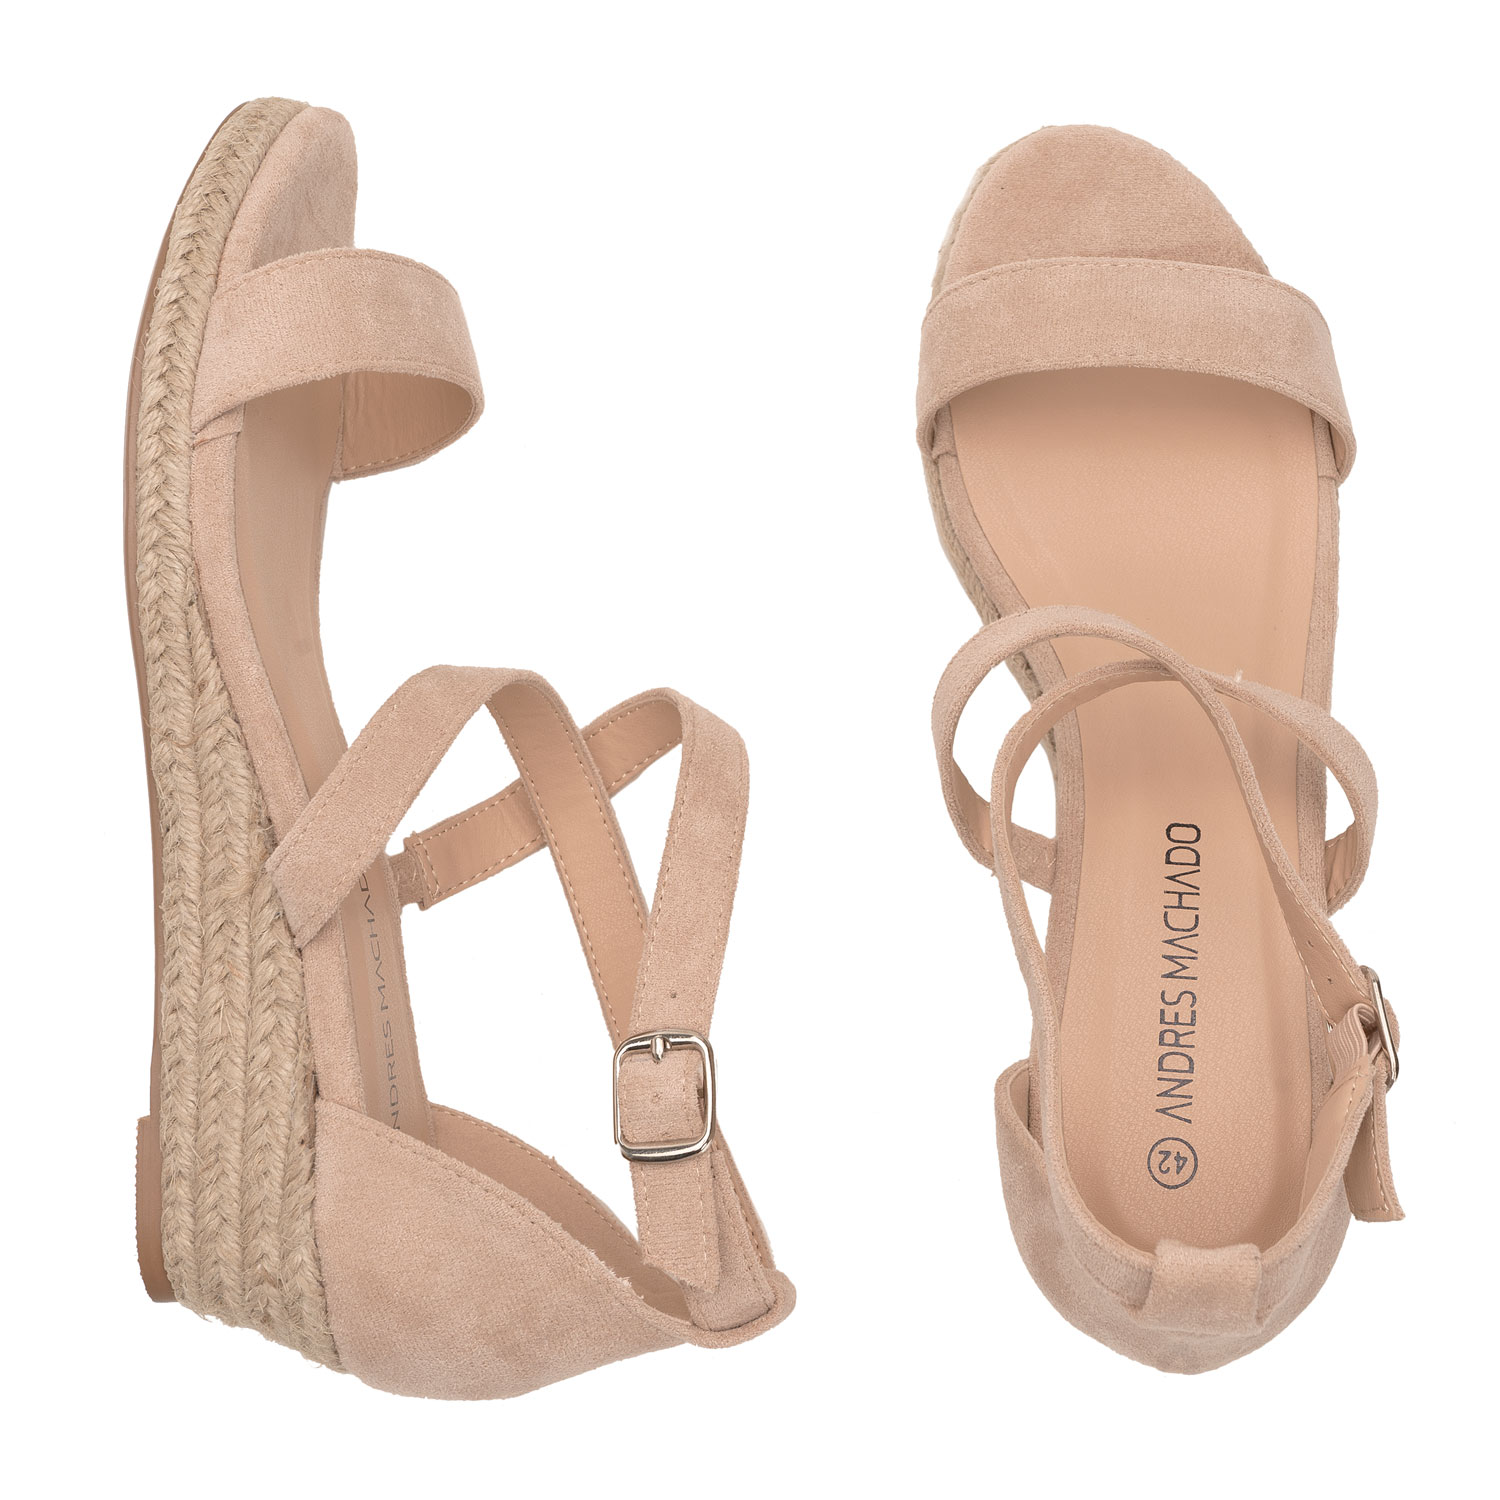 Beige Faux Suede Sandals with Jute Wedge 